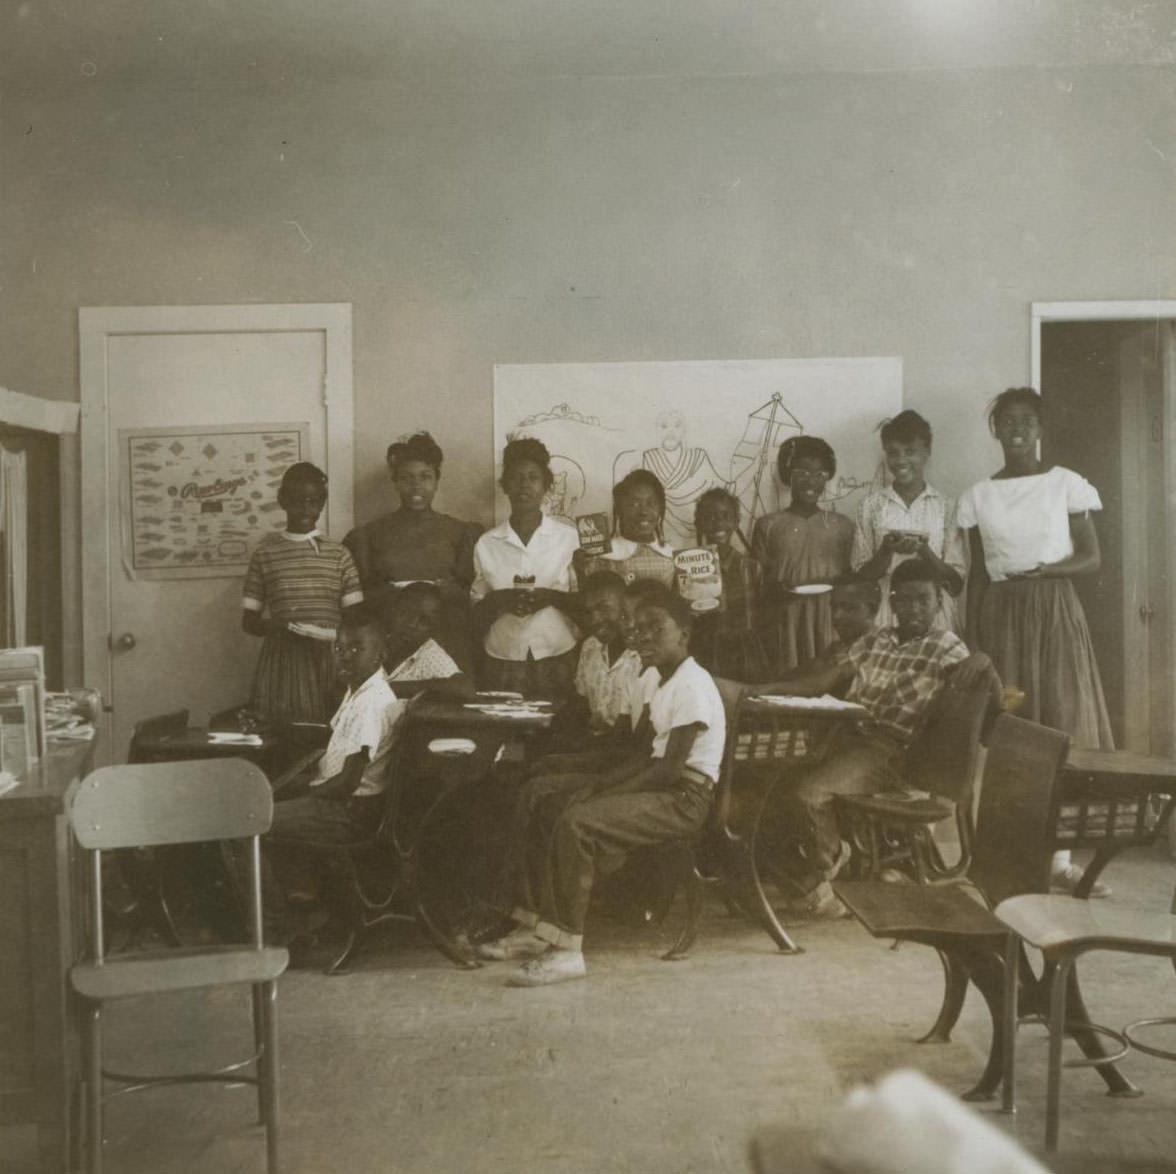 A group of students in a classroom, 1962 Boys sit at desks and girls stand against a wall behind them.